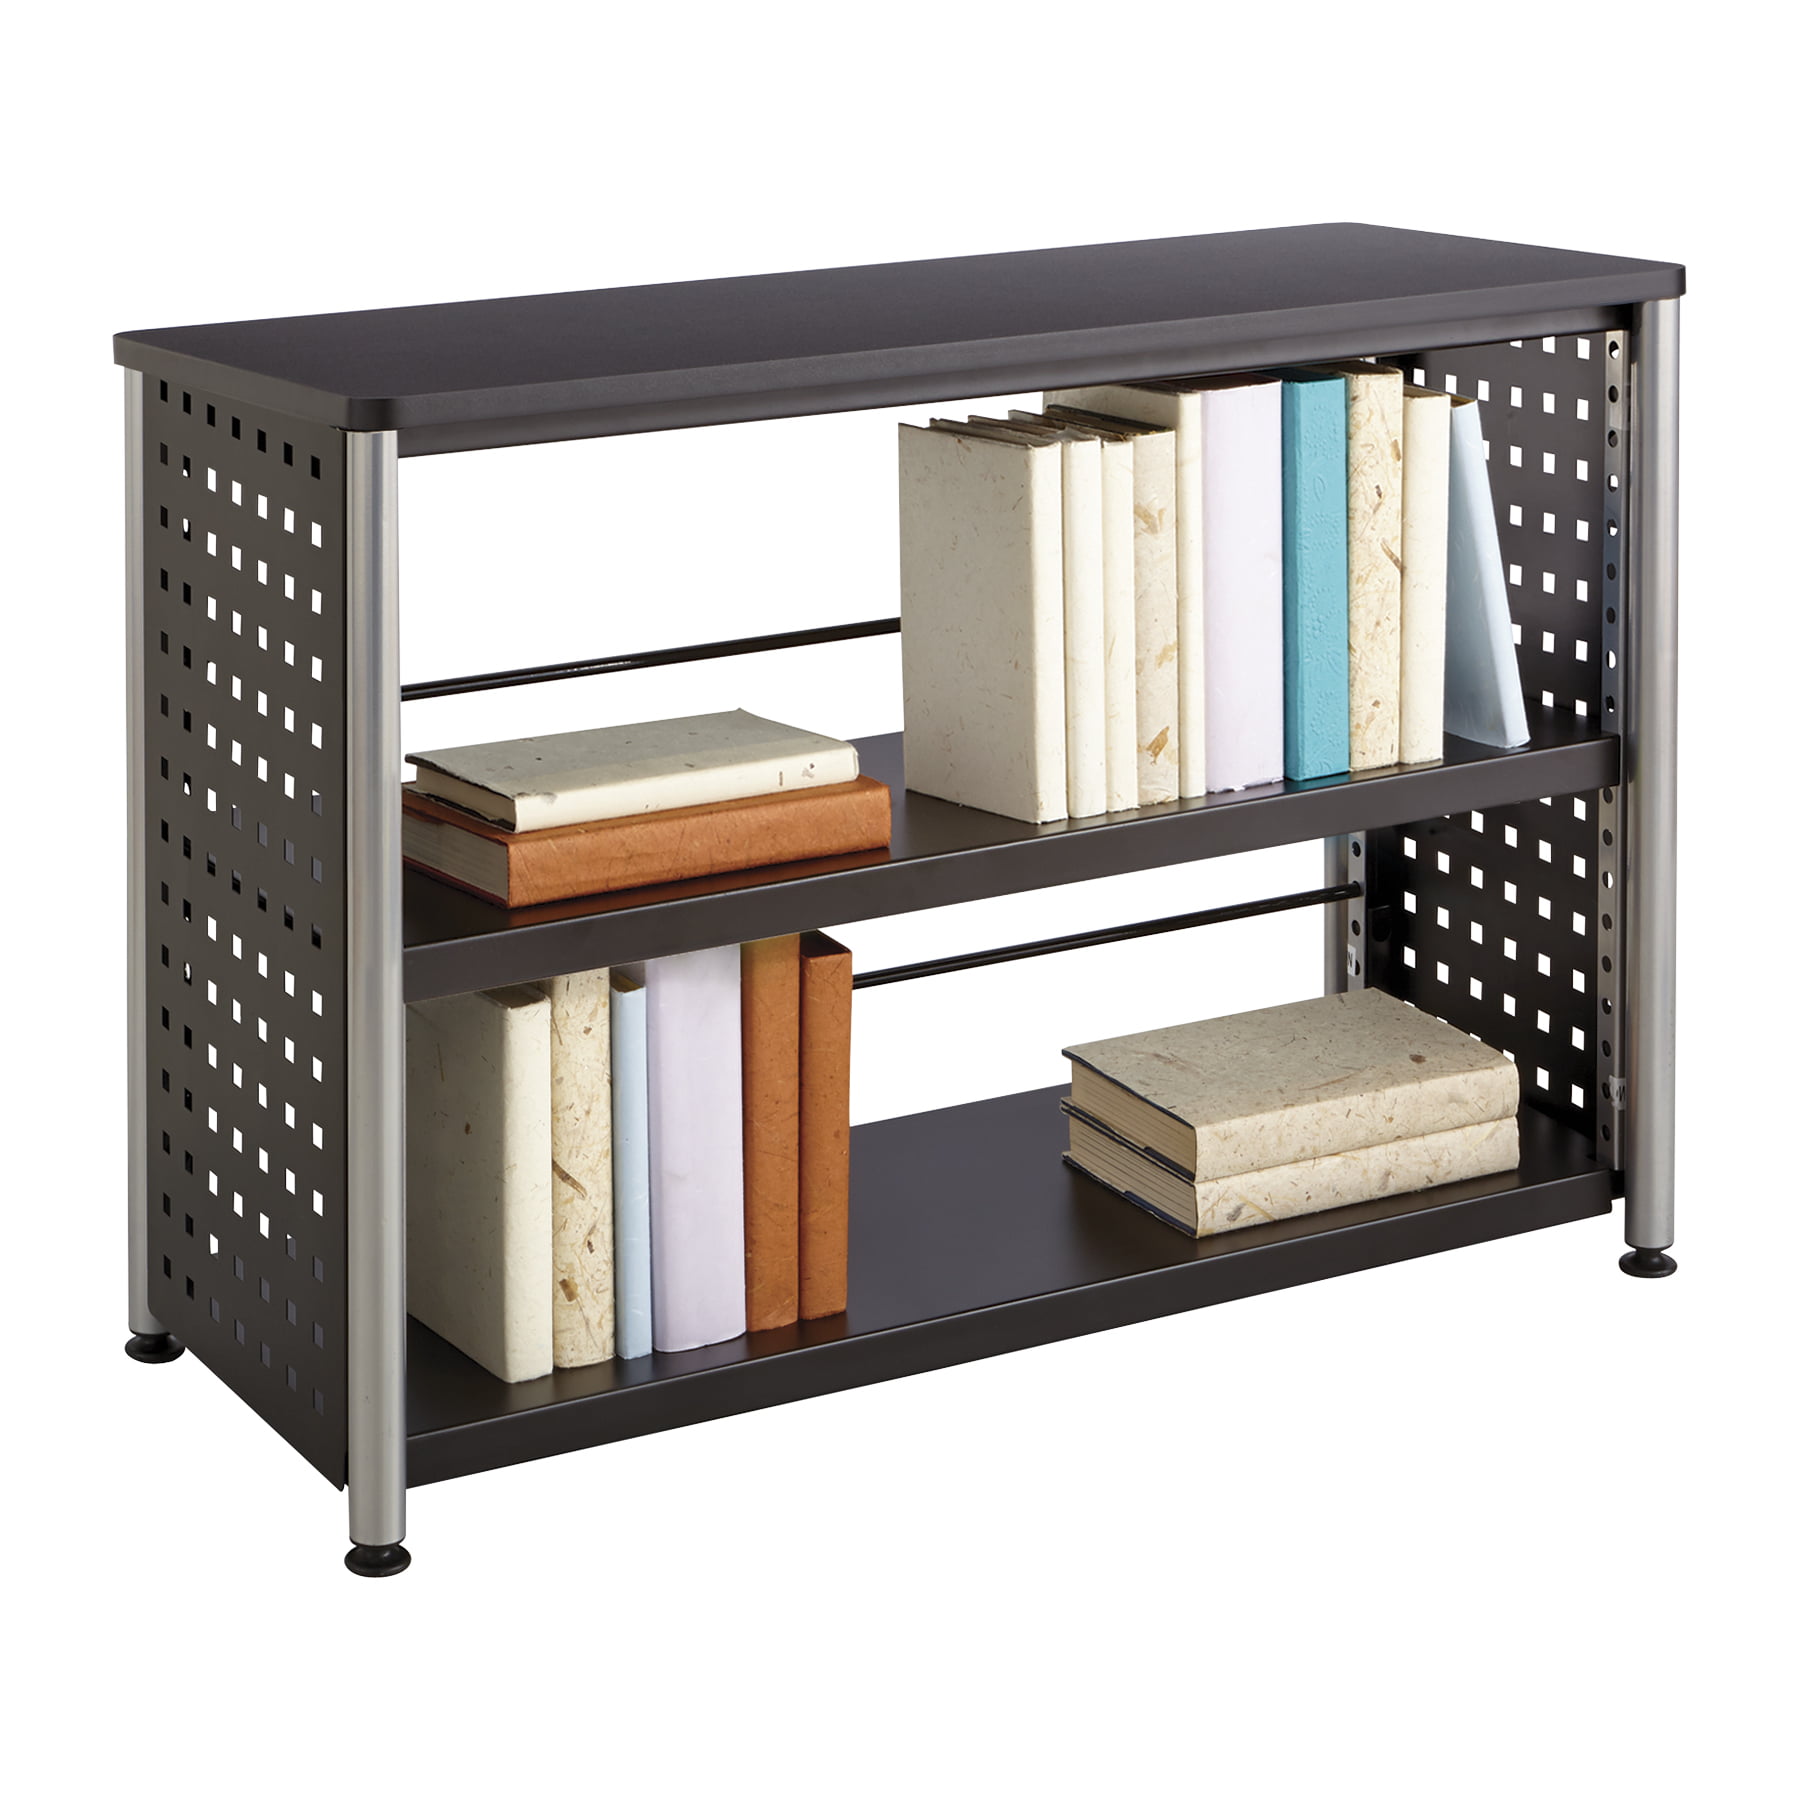 Creatice Black Bookcase for Large Space